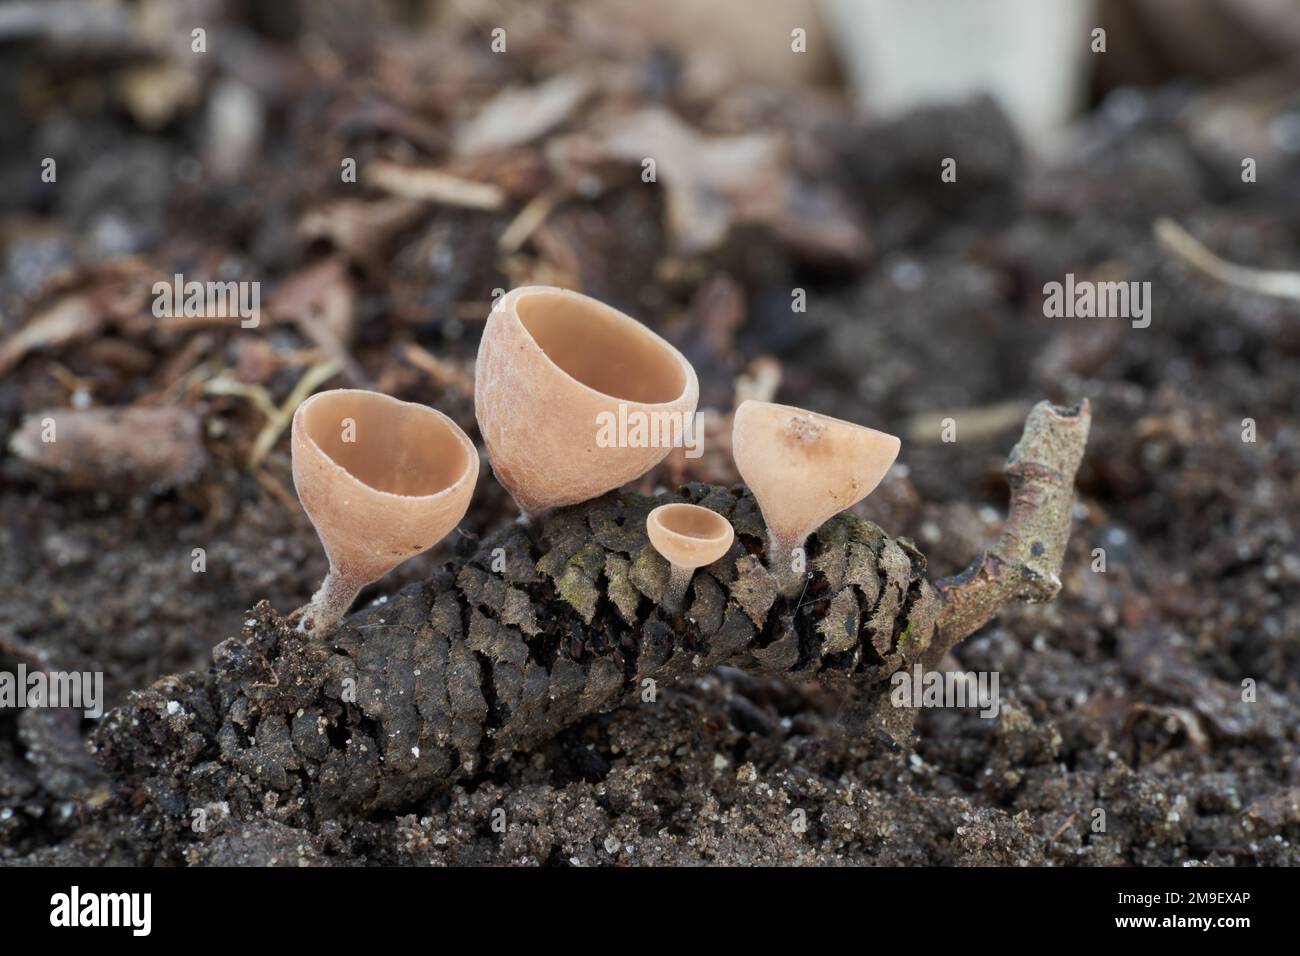 Inedible mushroom Ciboria coryli on the hazel catkin. Small cup-shaped wild mushrooms in the forest. Stock Photo